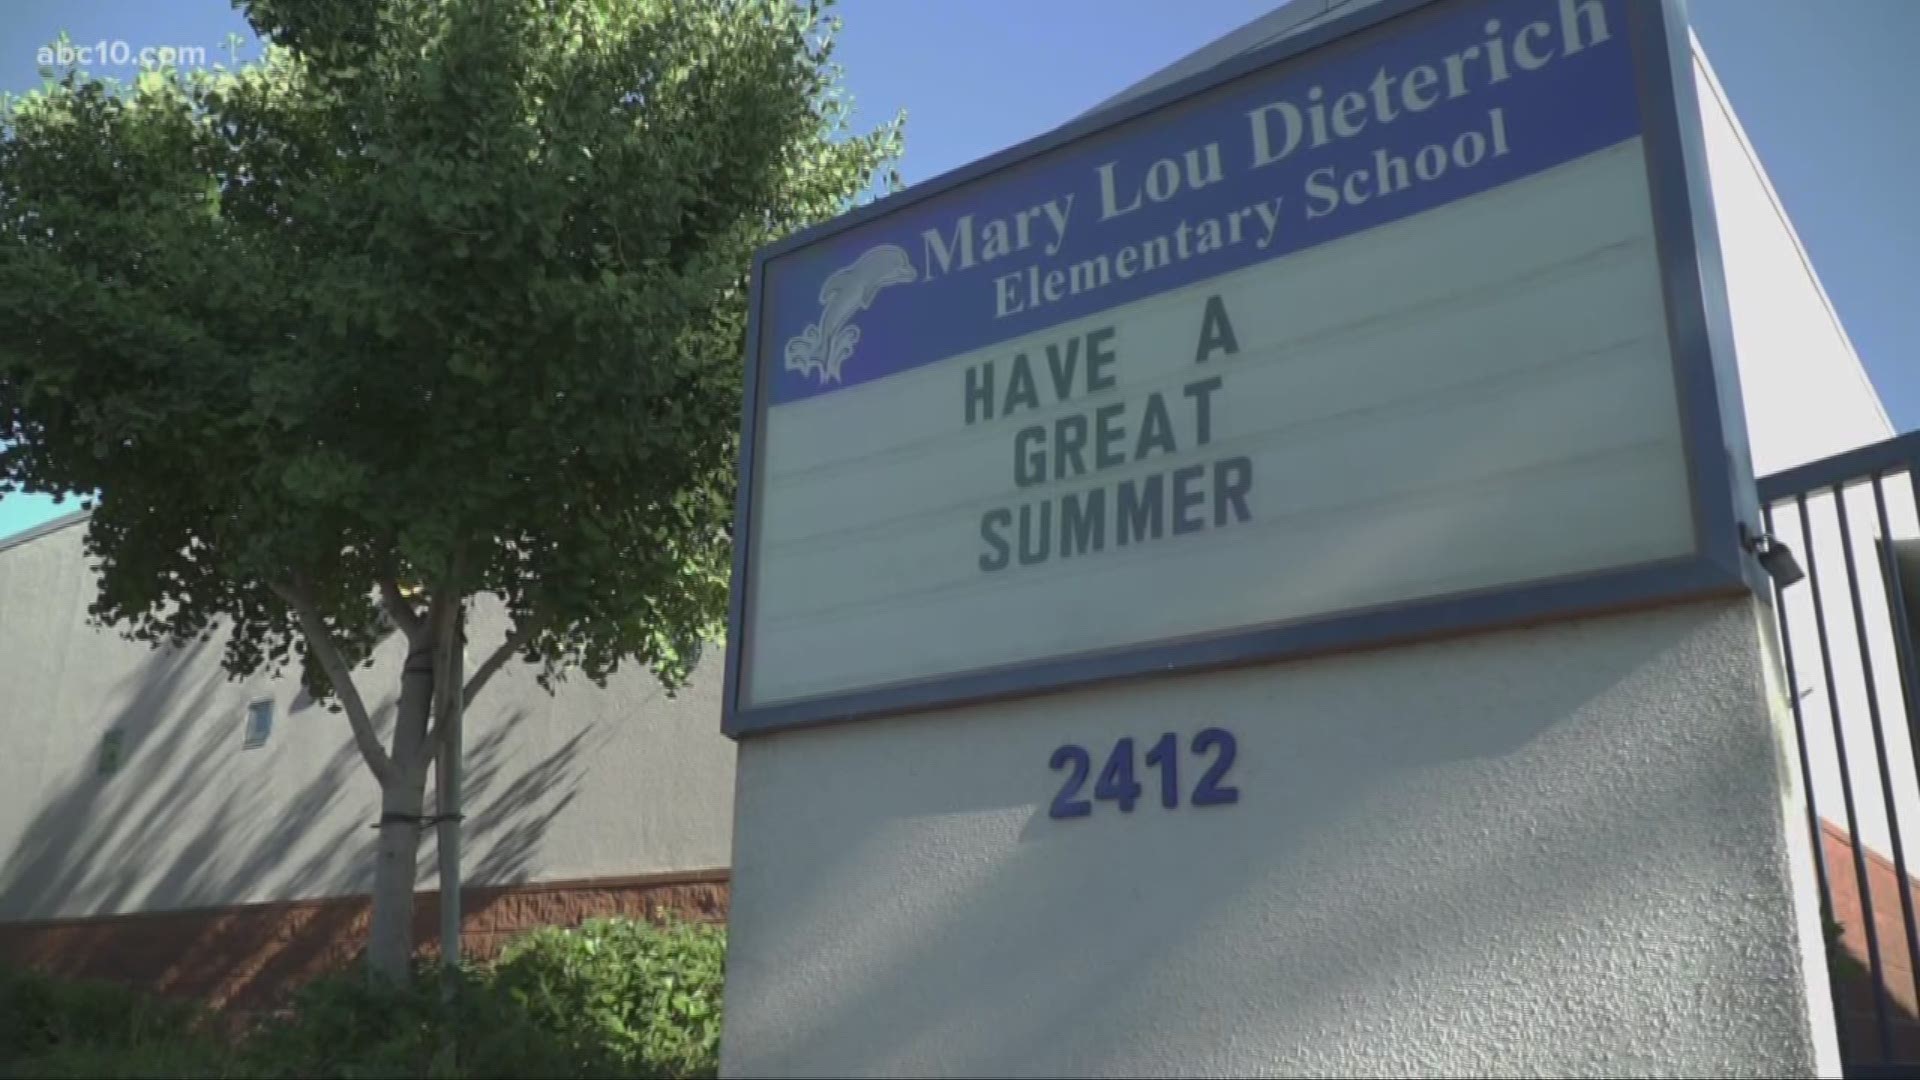 Two former custodians with the Stanislaus Union School District in Modesto say they were sexually harassed and had to put up with sexual misconduct by their school's female principal during their time working at Mary Lou Dietrich Elementary.